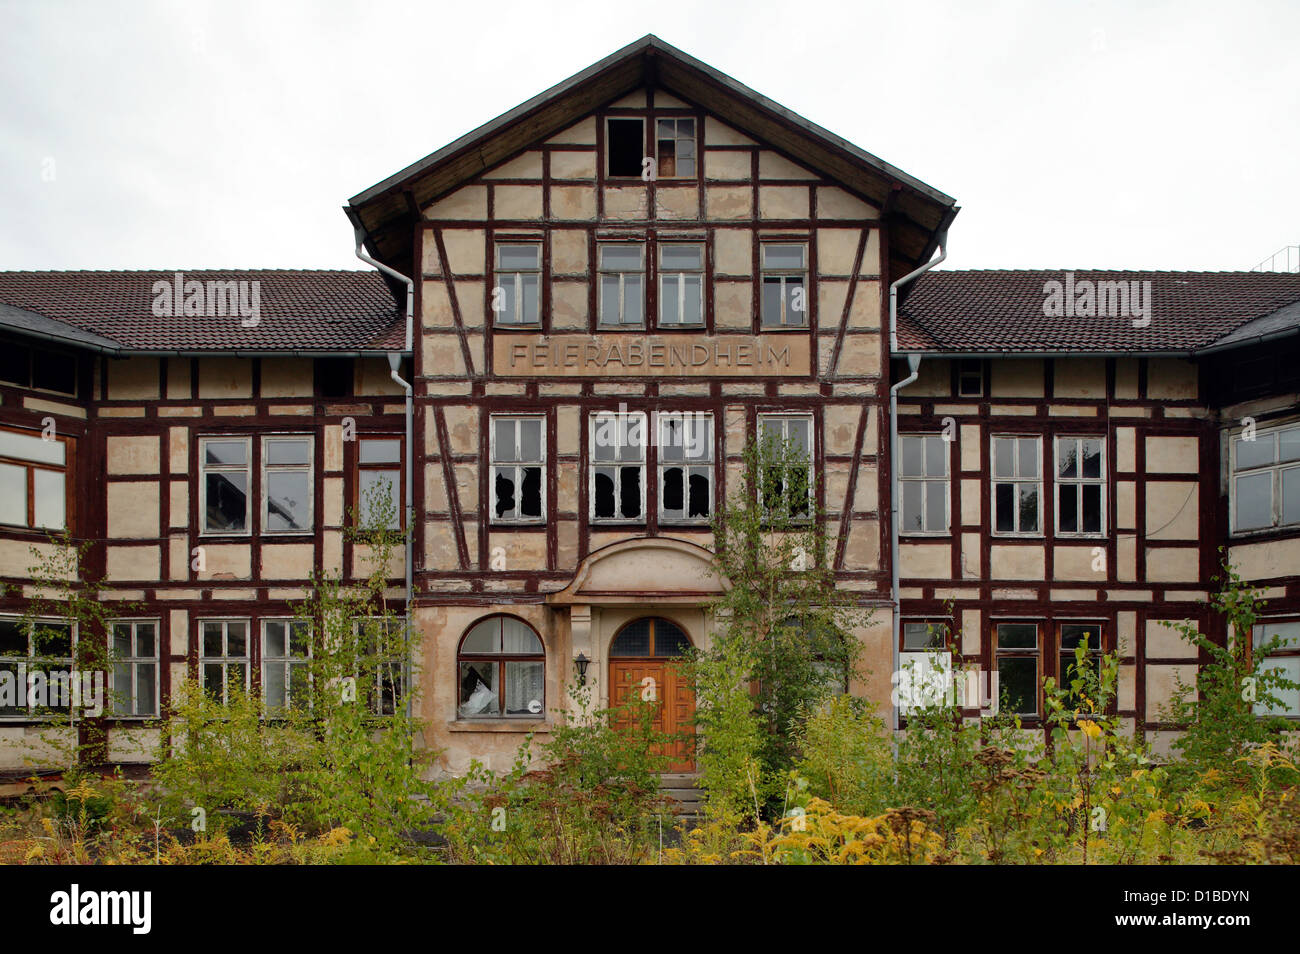 Suhl, Germany, the abandoned home Feierabend Stock Photo